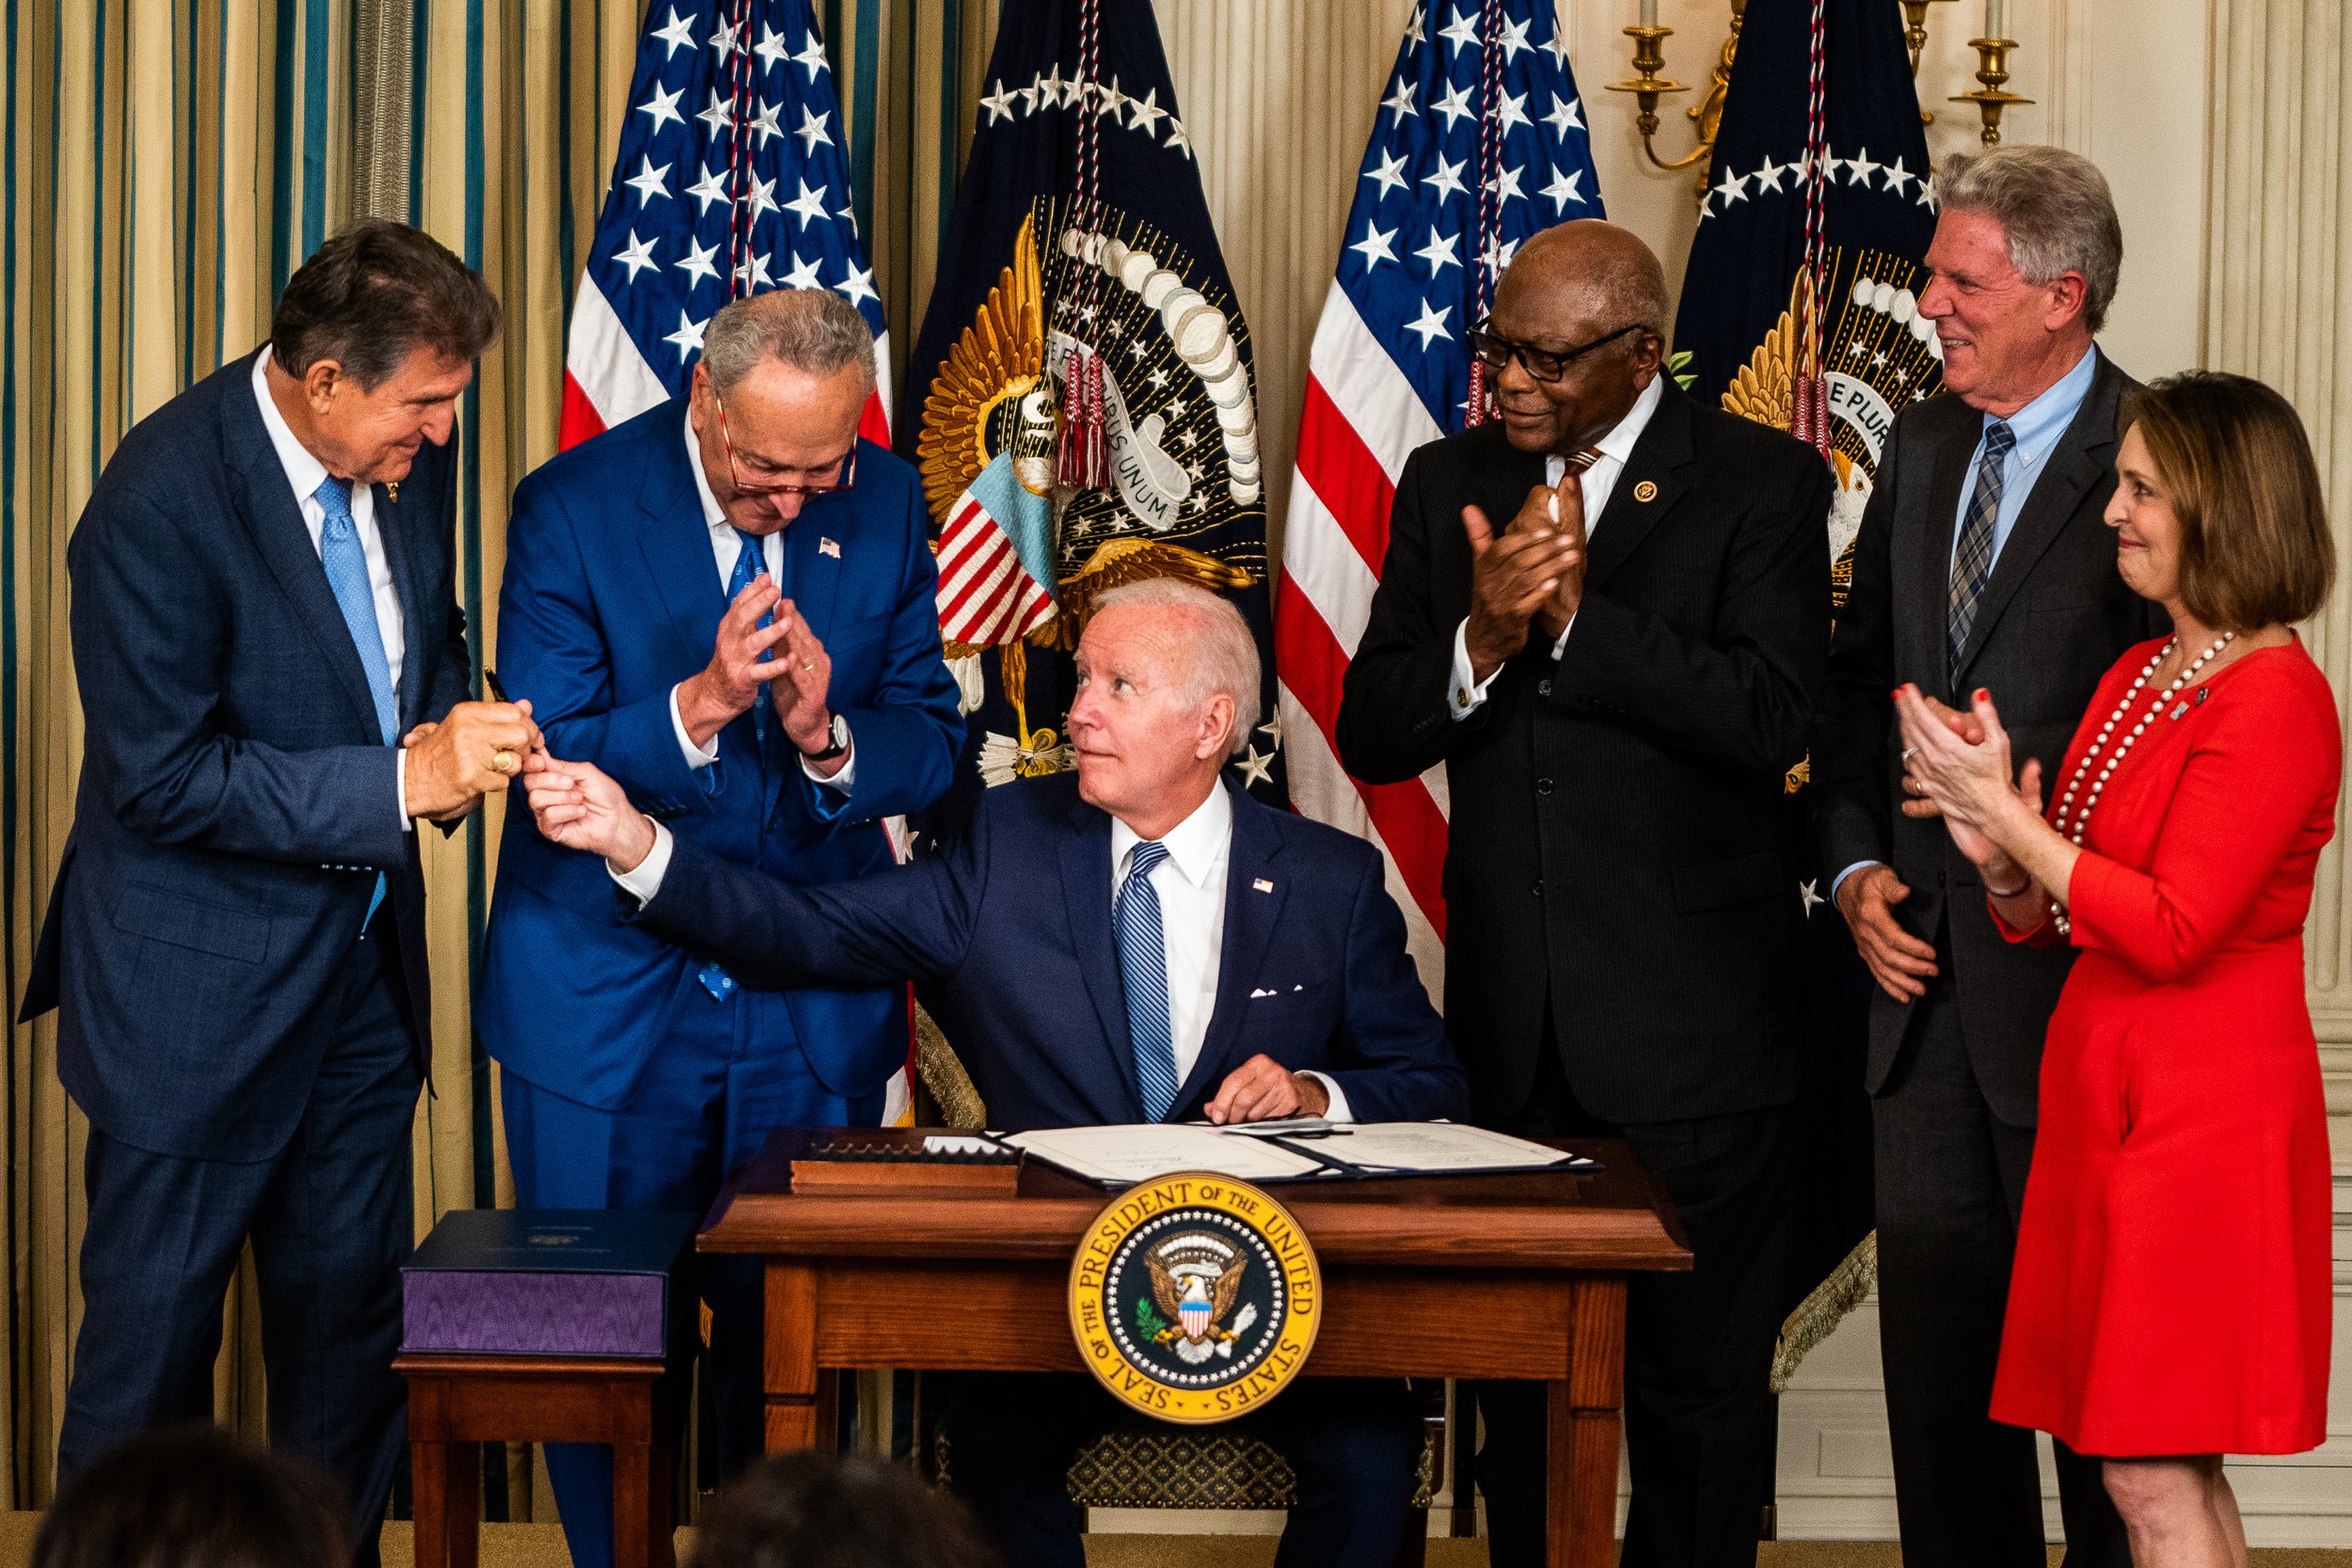  US President Joe Biden hands Sen. Joe Manchin (D-W.VA) the pen used to sign into law H.R. 5376, the Inflation Reduction Act of 2022 (climate change and health care bill) in the State Dining Room of the White House. 